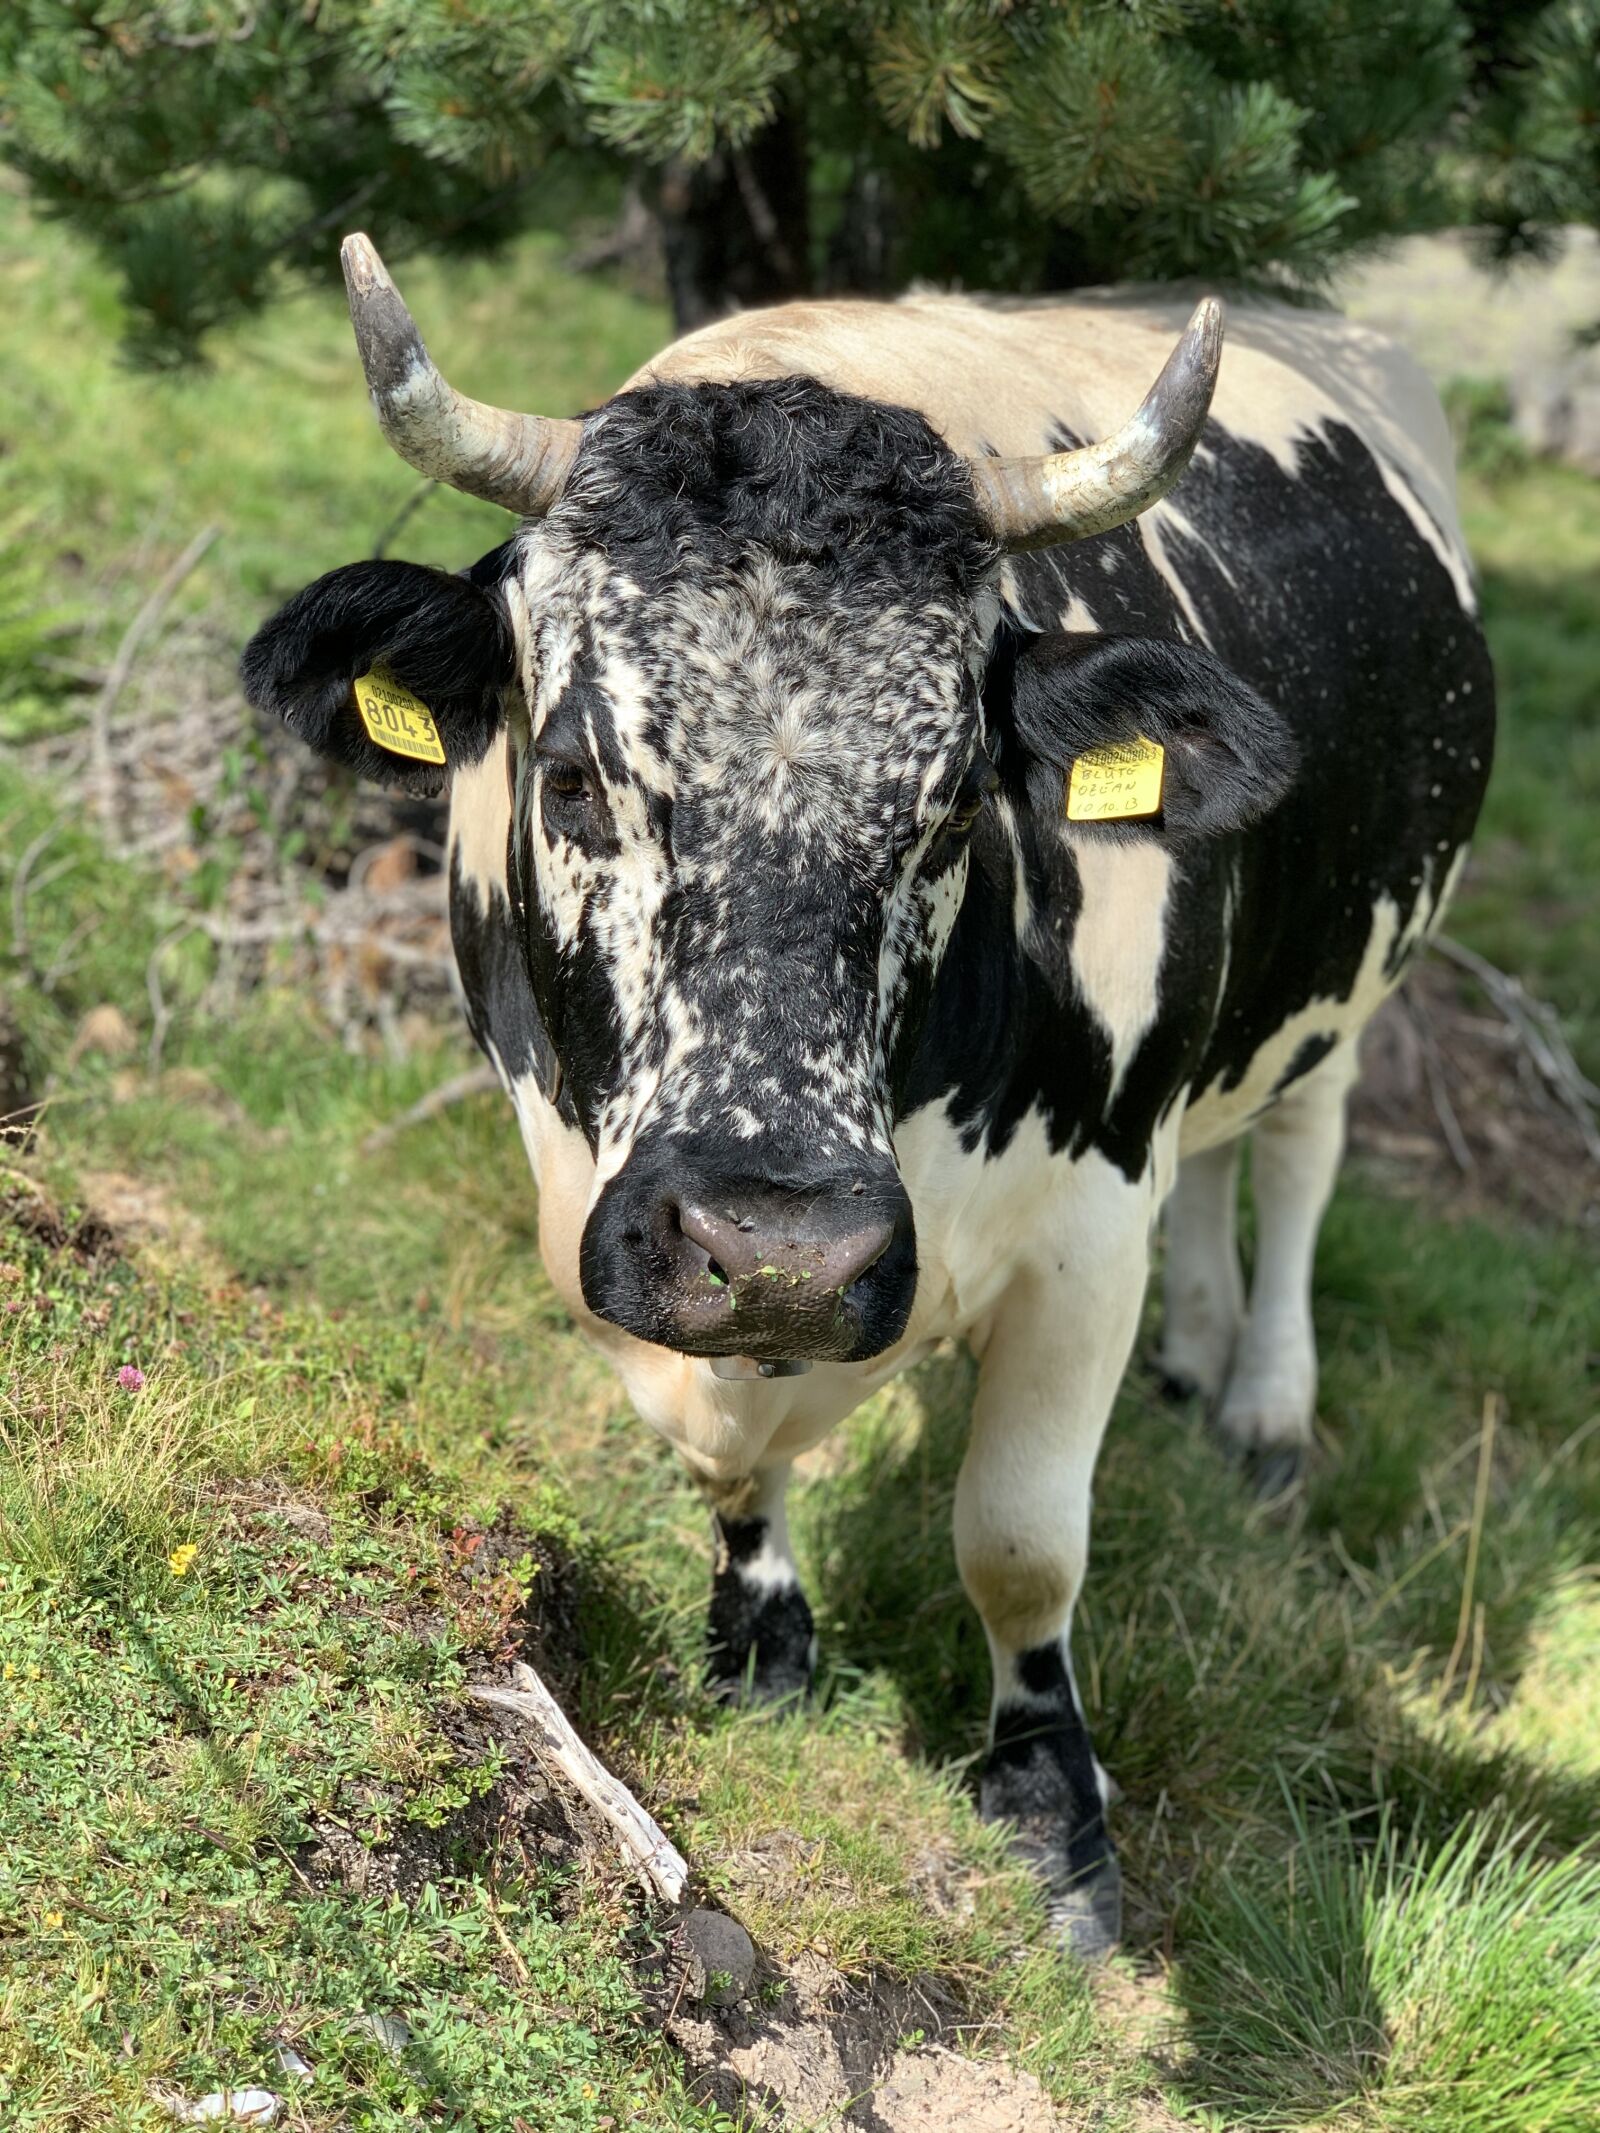 Apple iPhone XS + iPhone XS back dual camera 6mm f/2.4 sample photo. Cow, nature, cows photography